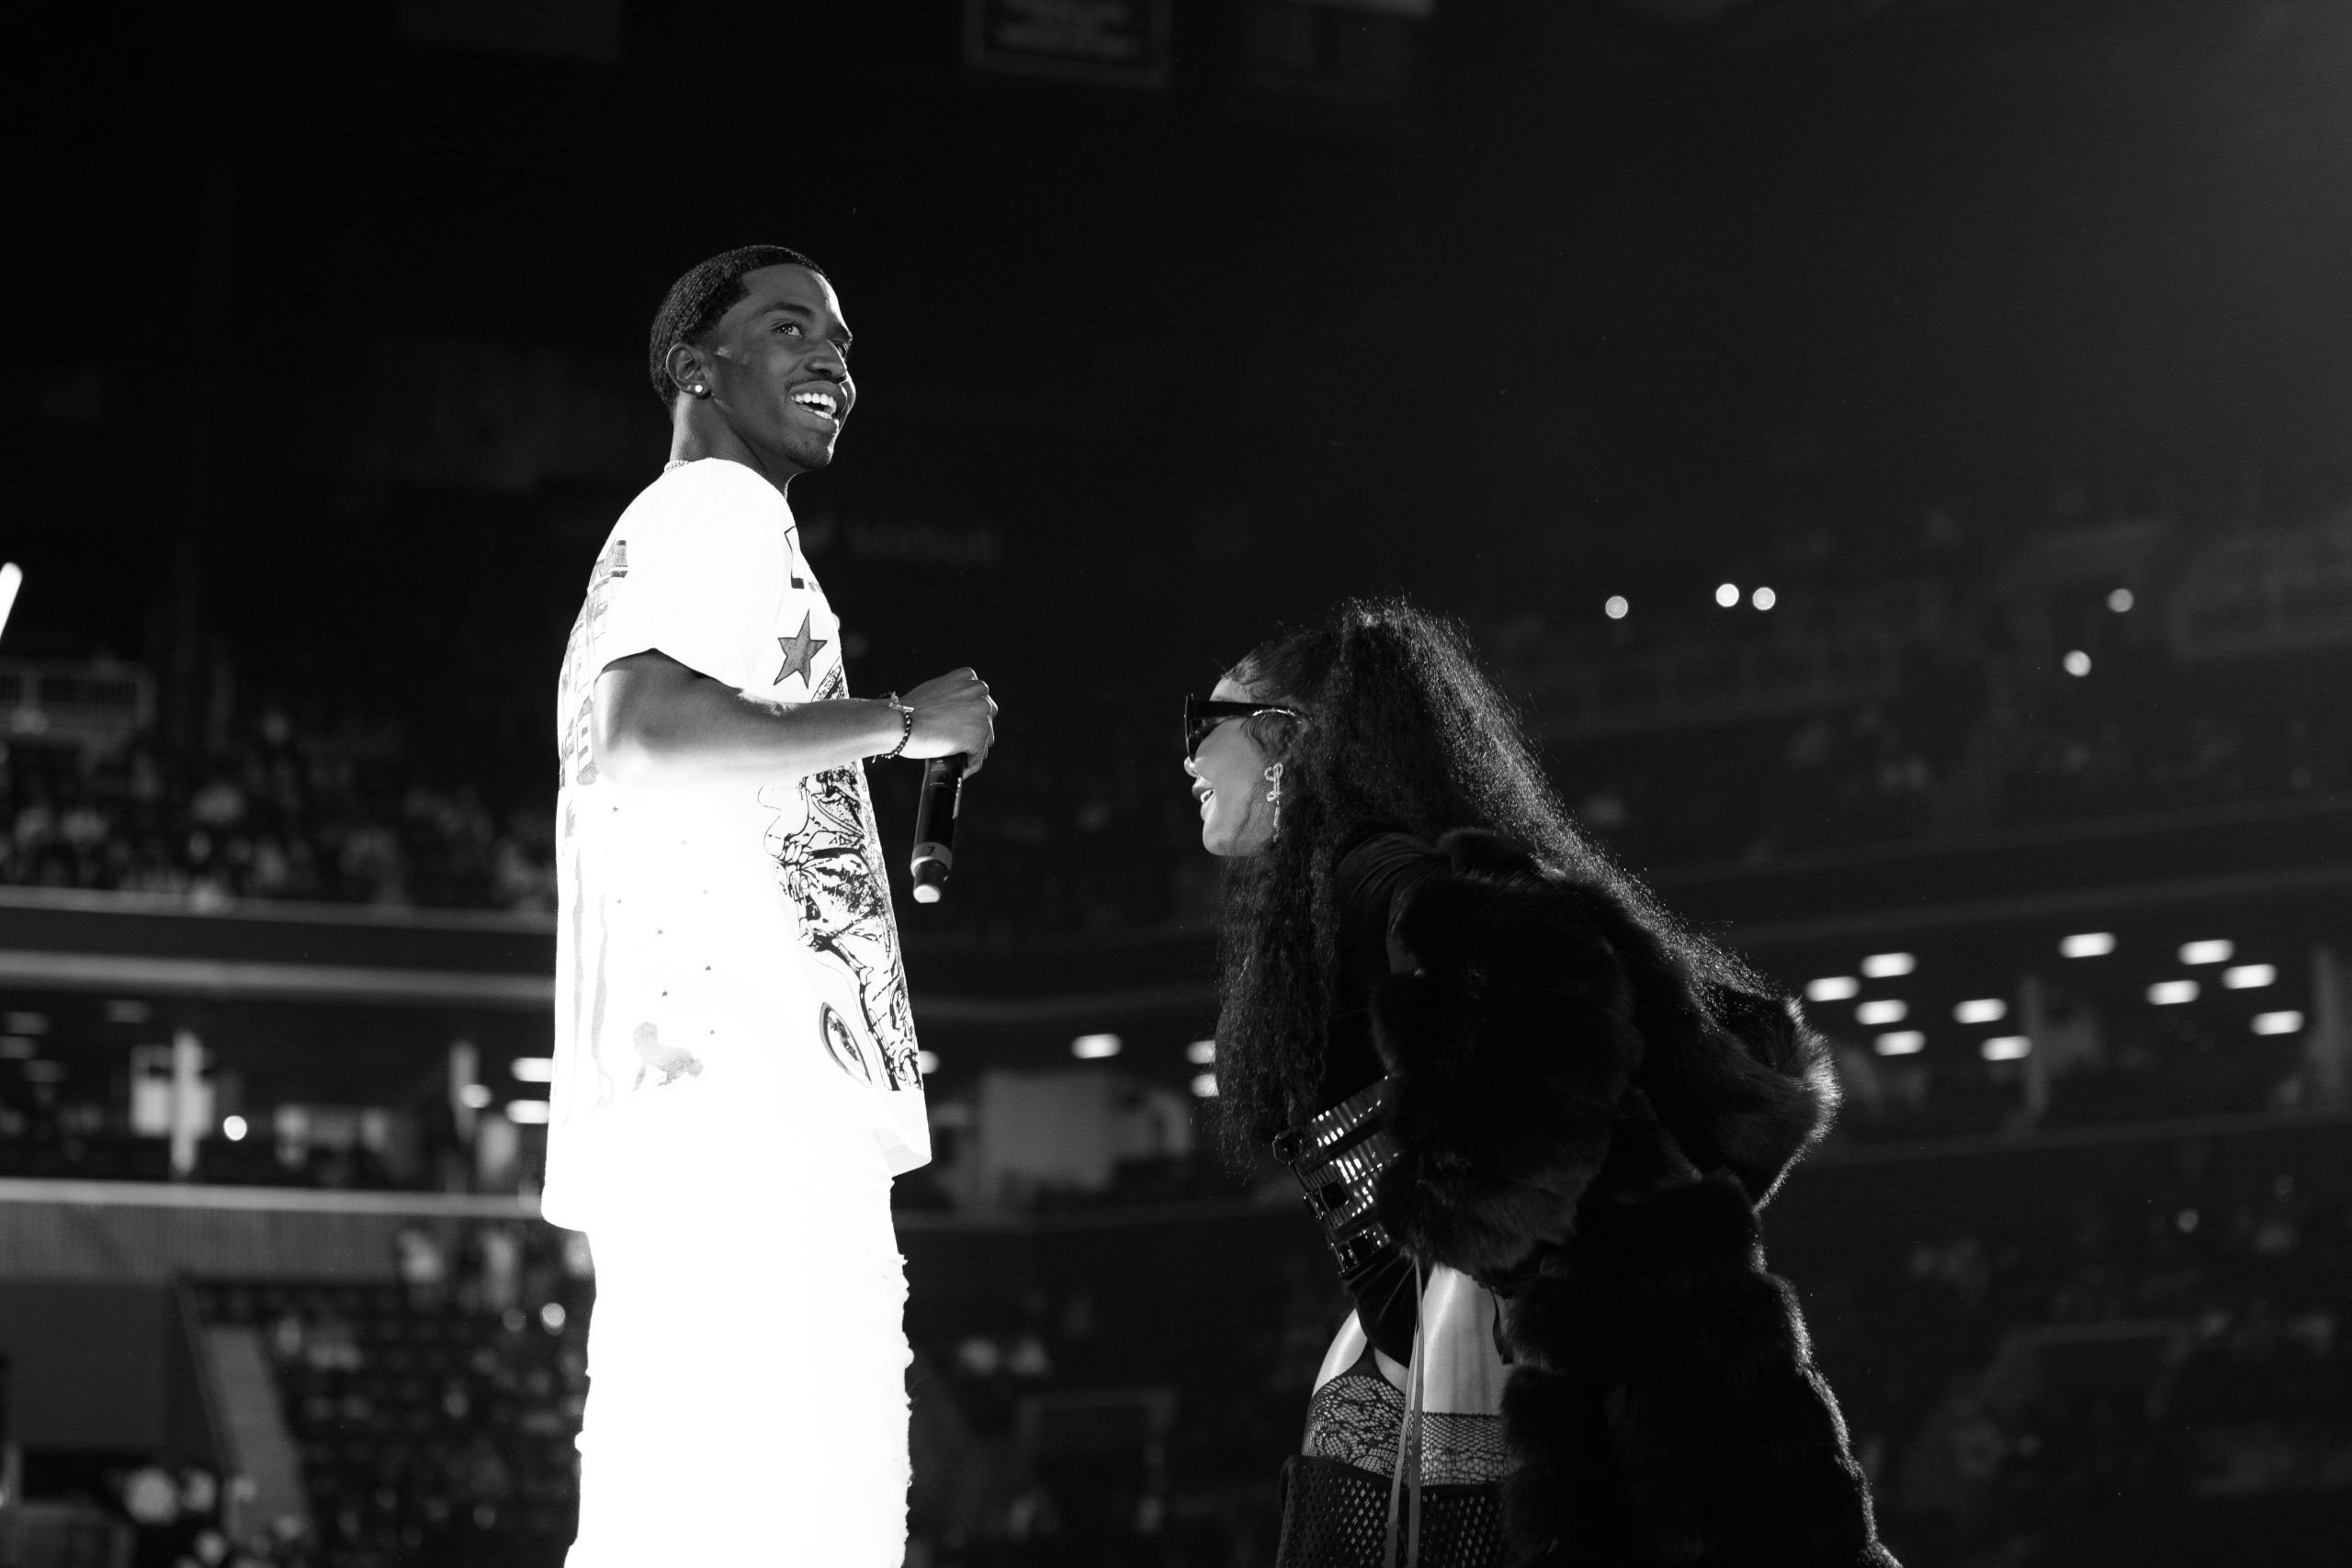 Lil Kim and King Combs onstage - Barclays December 30, 2022 - Photo Credit Henry Hwu